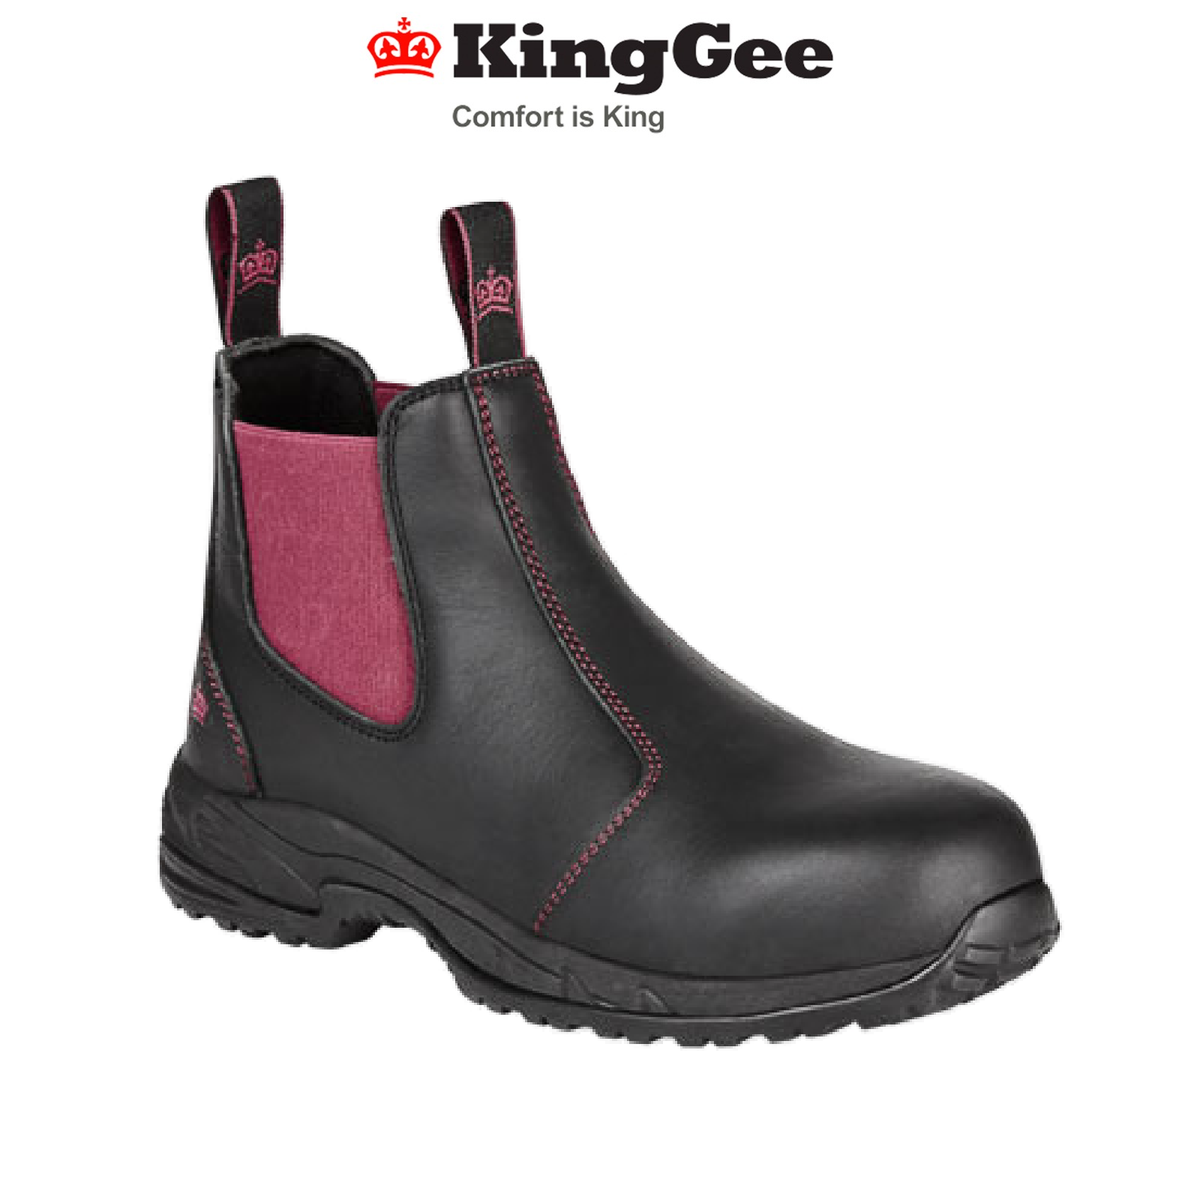 KingGee Womens Tradies Elastic Work Safety Boots Leather Oxford Fabric K27390